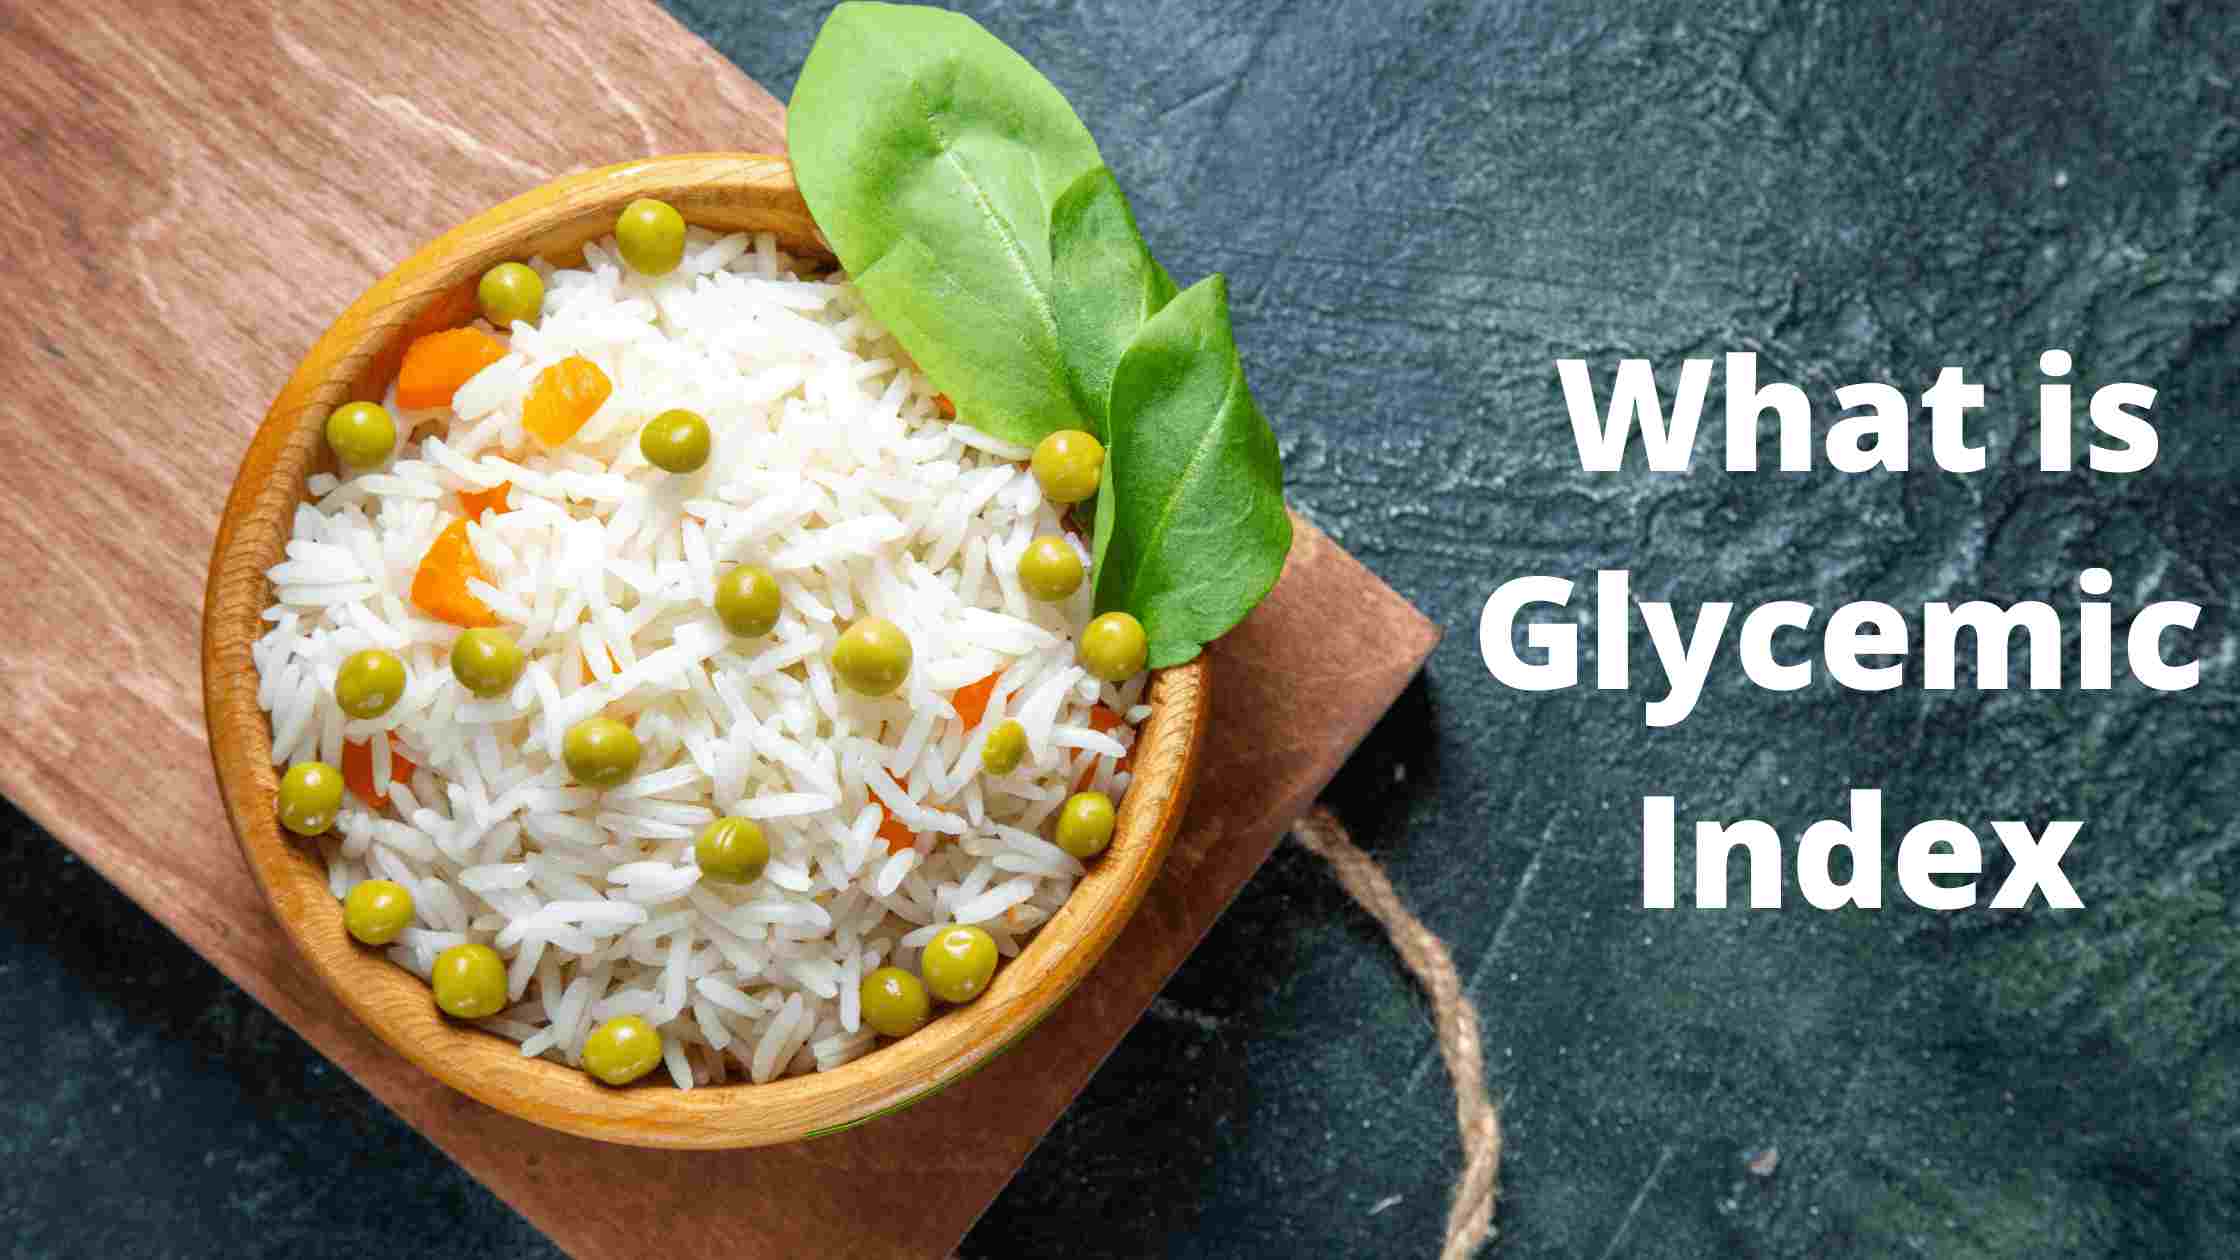 What is Glycemic Index